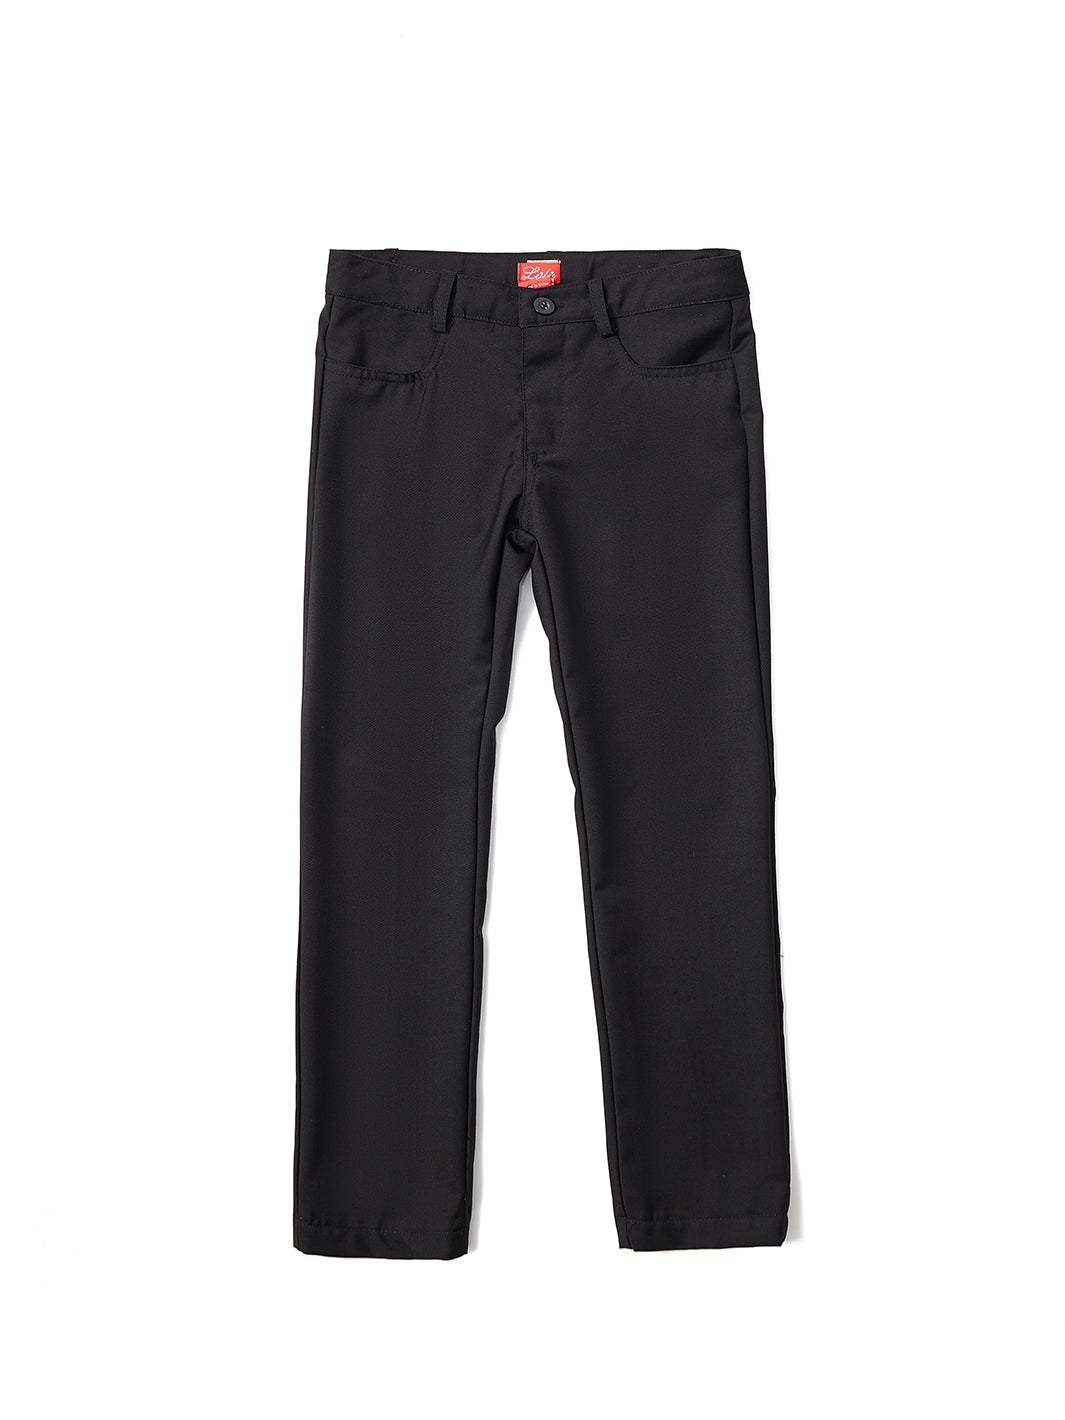 All Year Round Long Black Pants